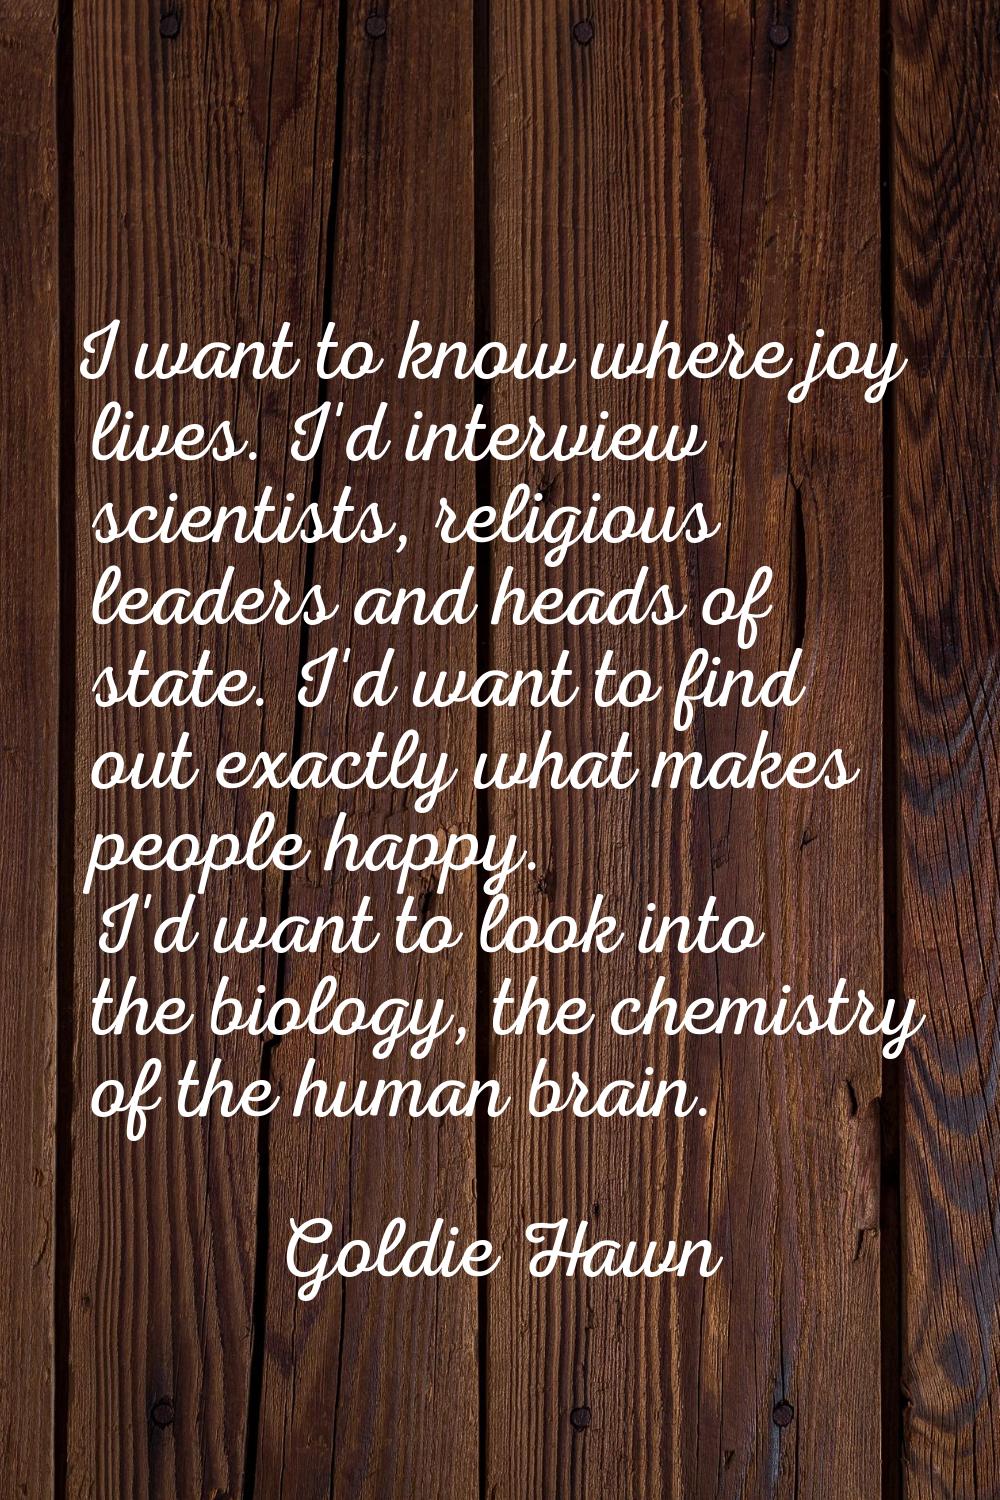 I want to know where joy lives. I'd interview scientists, religious leaders and heads of state. I'd